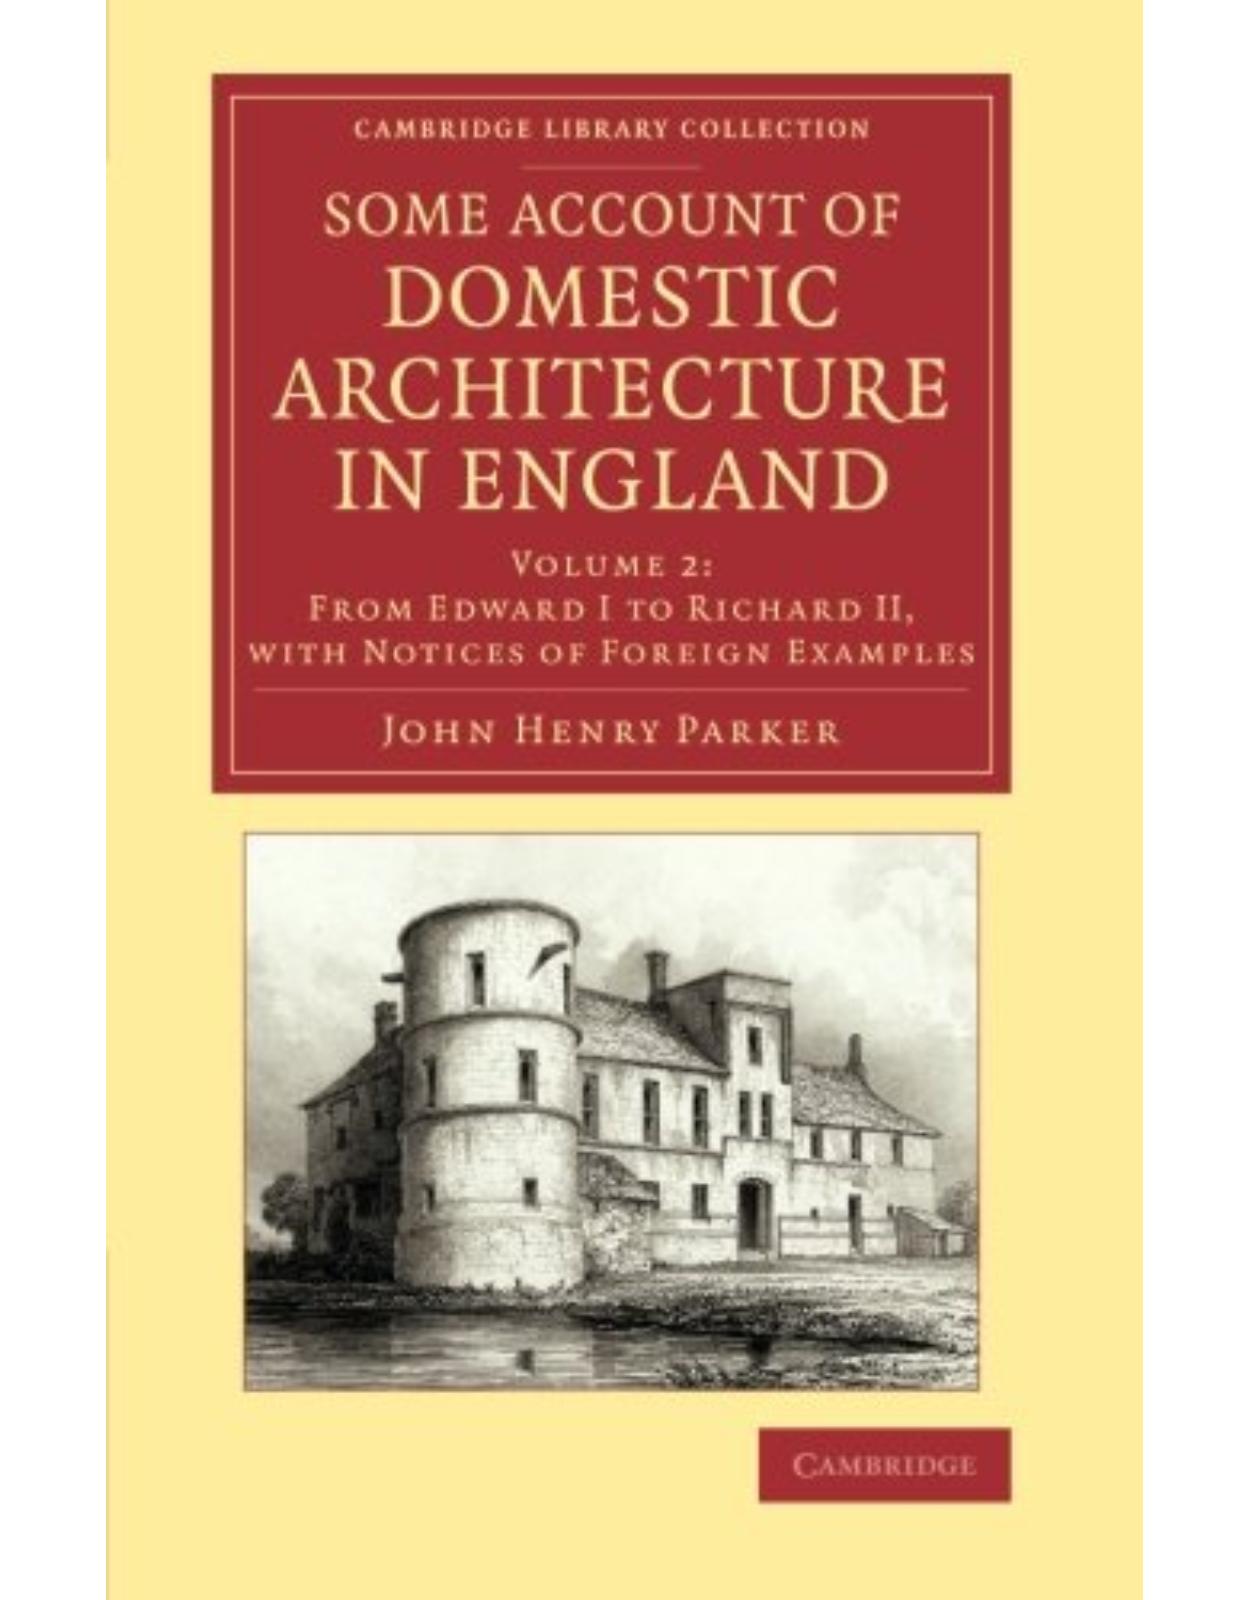 Some Account of Domestic Architecture in England 2 Volume Set: Some Account of Domestic Architecture in England: From Edward I to Richard II, with ... Library Collection - Art and Architecture)